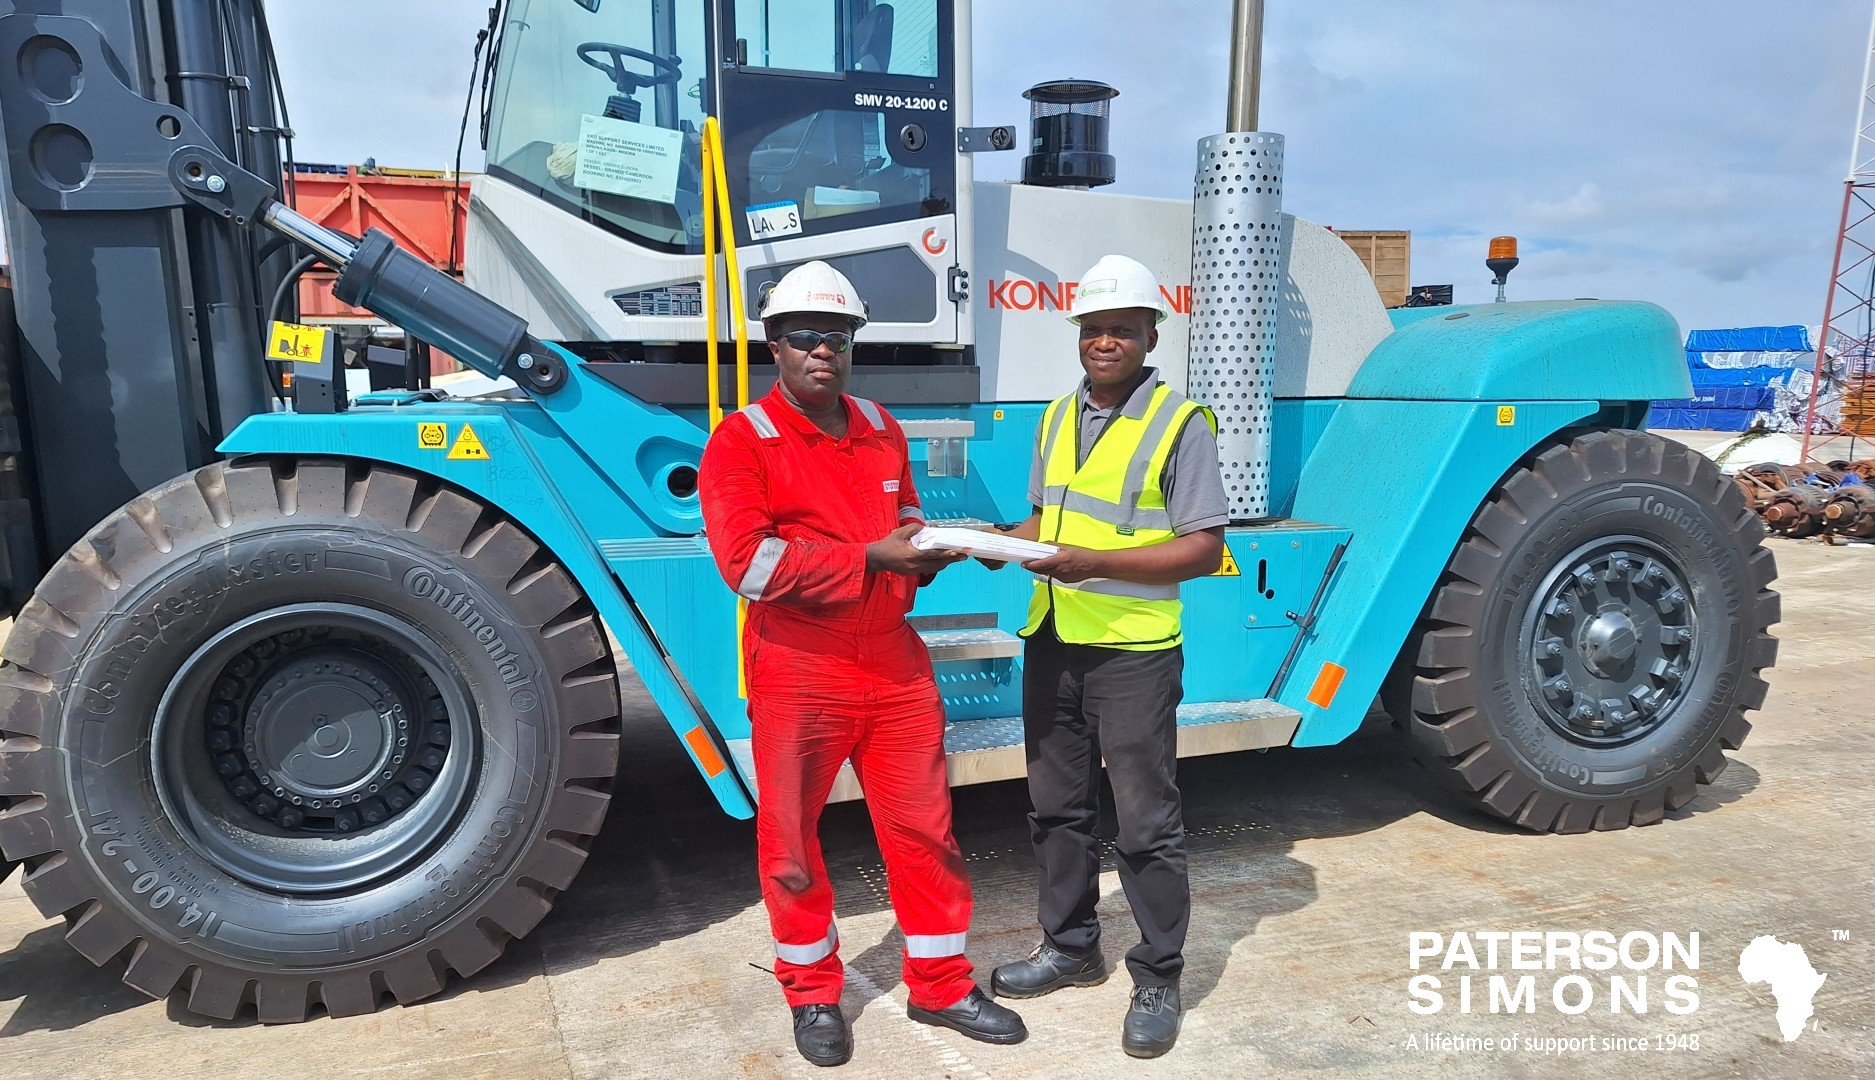 PATERSON SIMONS DELIVERS KONECRANES SMV20-1200C FORKLIFT TO EKO SUPPORT SERVICES LIMITED IN THE LAGOS PORT COMPLEX, NIGERIA